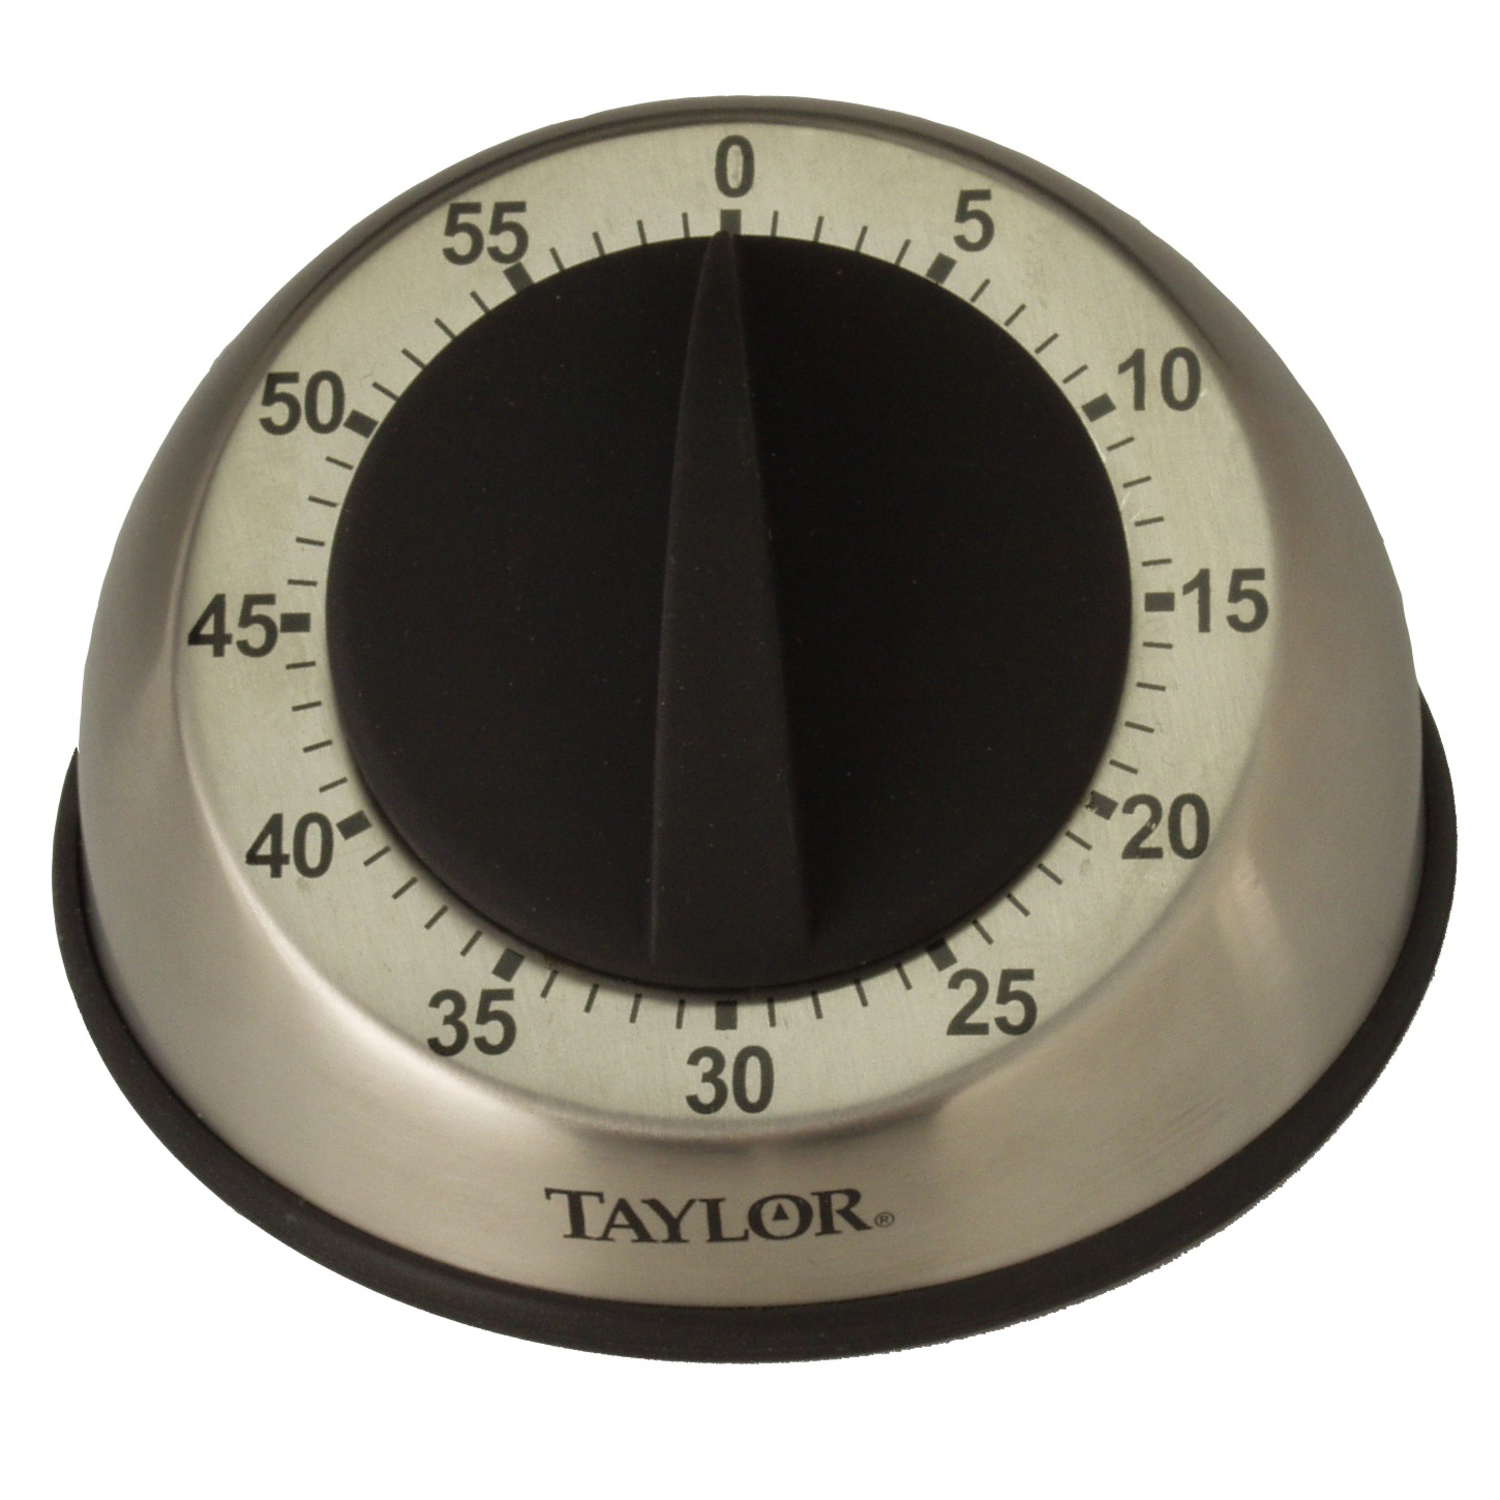 Photos - Kitchen timer Taylor Pro Mechanical Stainless Steel Timer 5830 